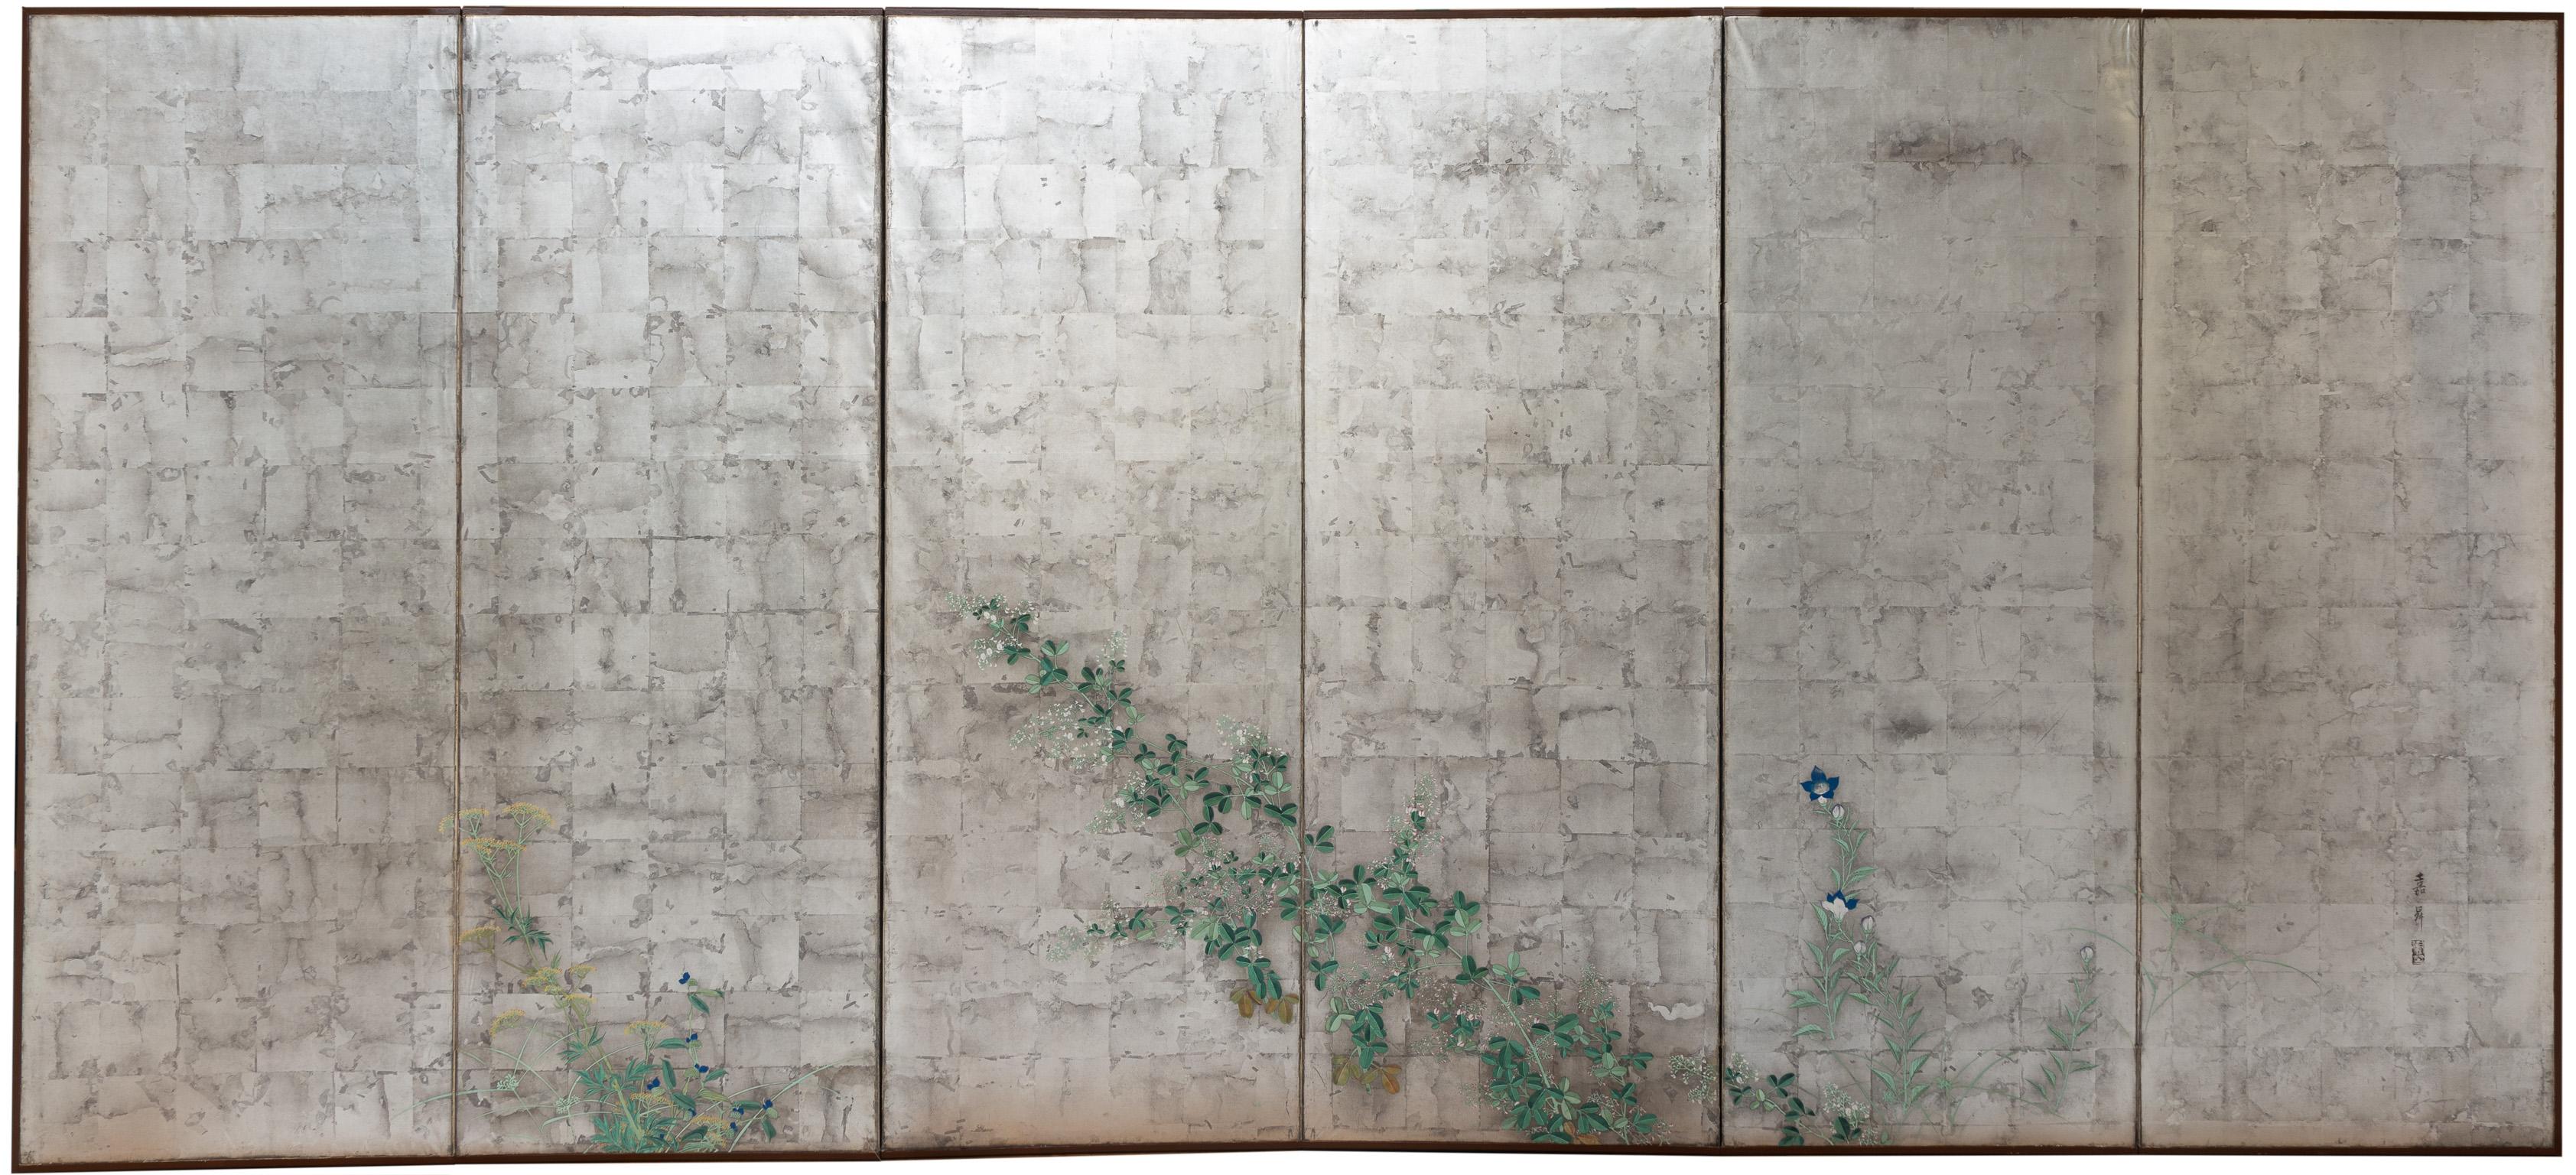 A pair of six-panel screen with a silver ground, decorated with the “Seven kinds of grass of Autumn” (